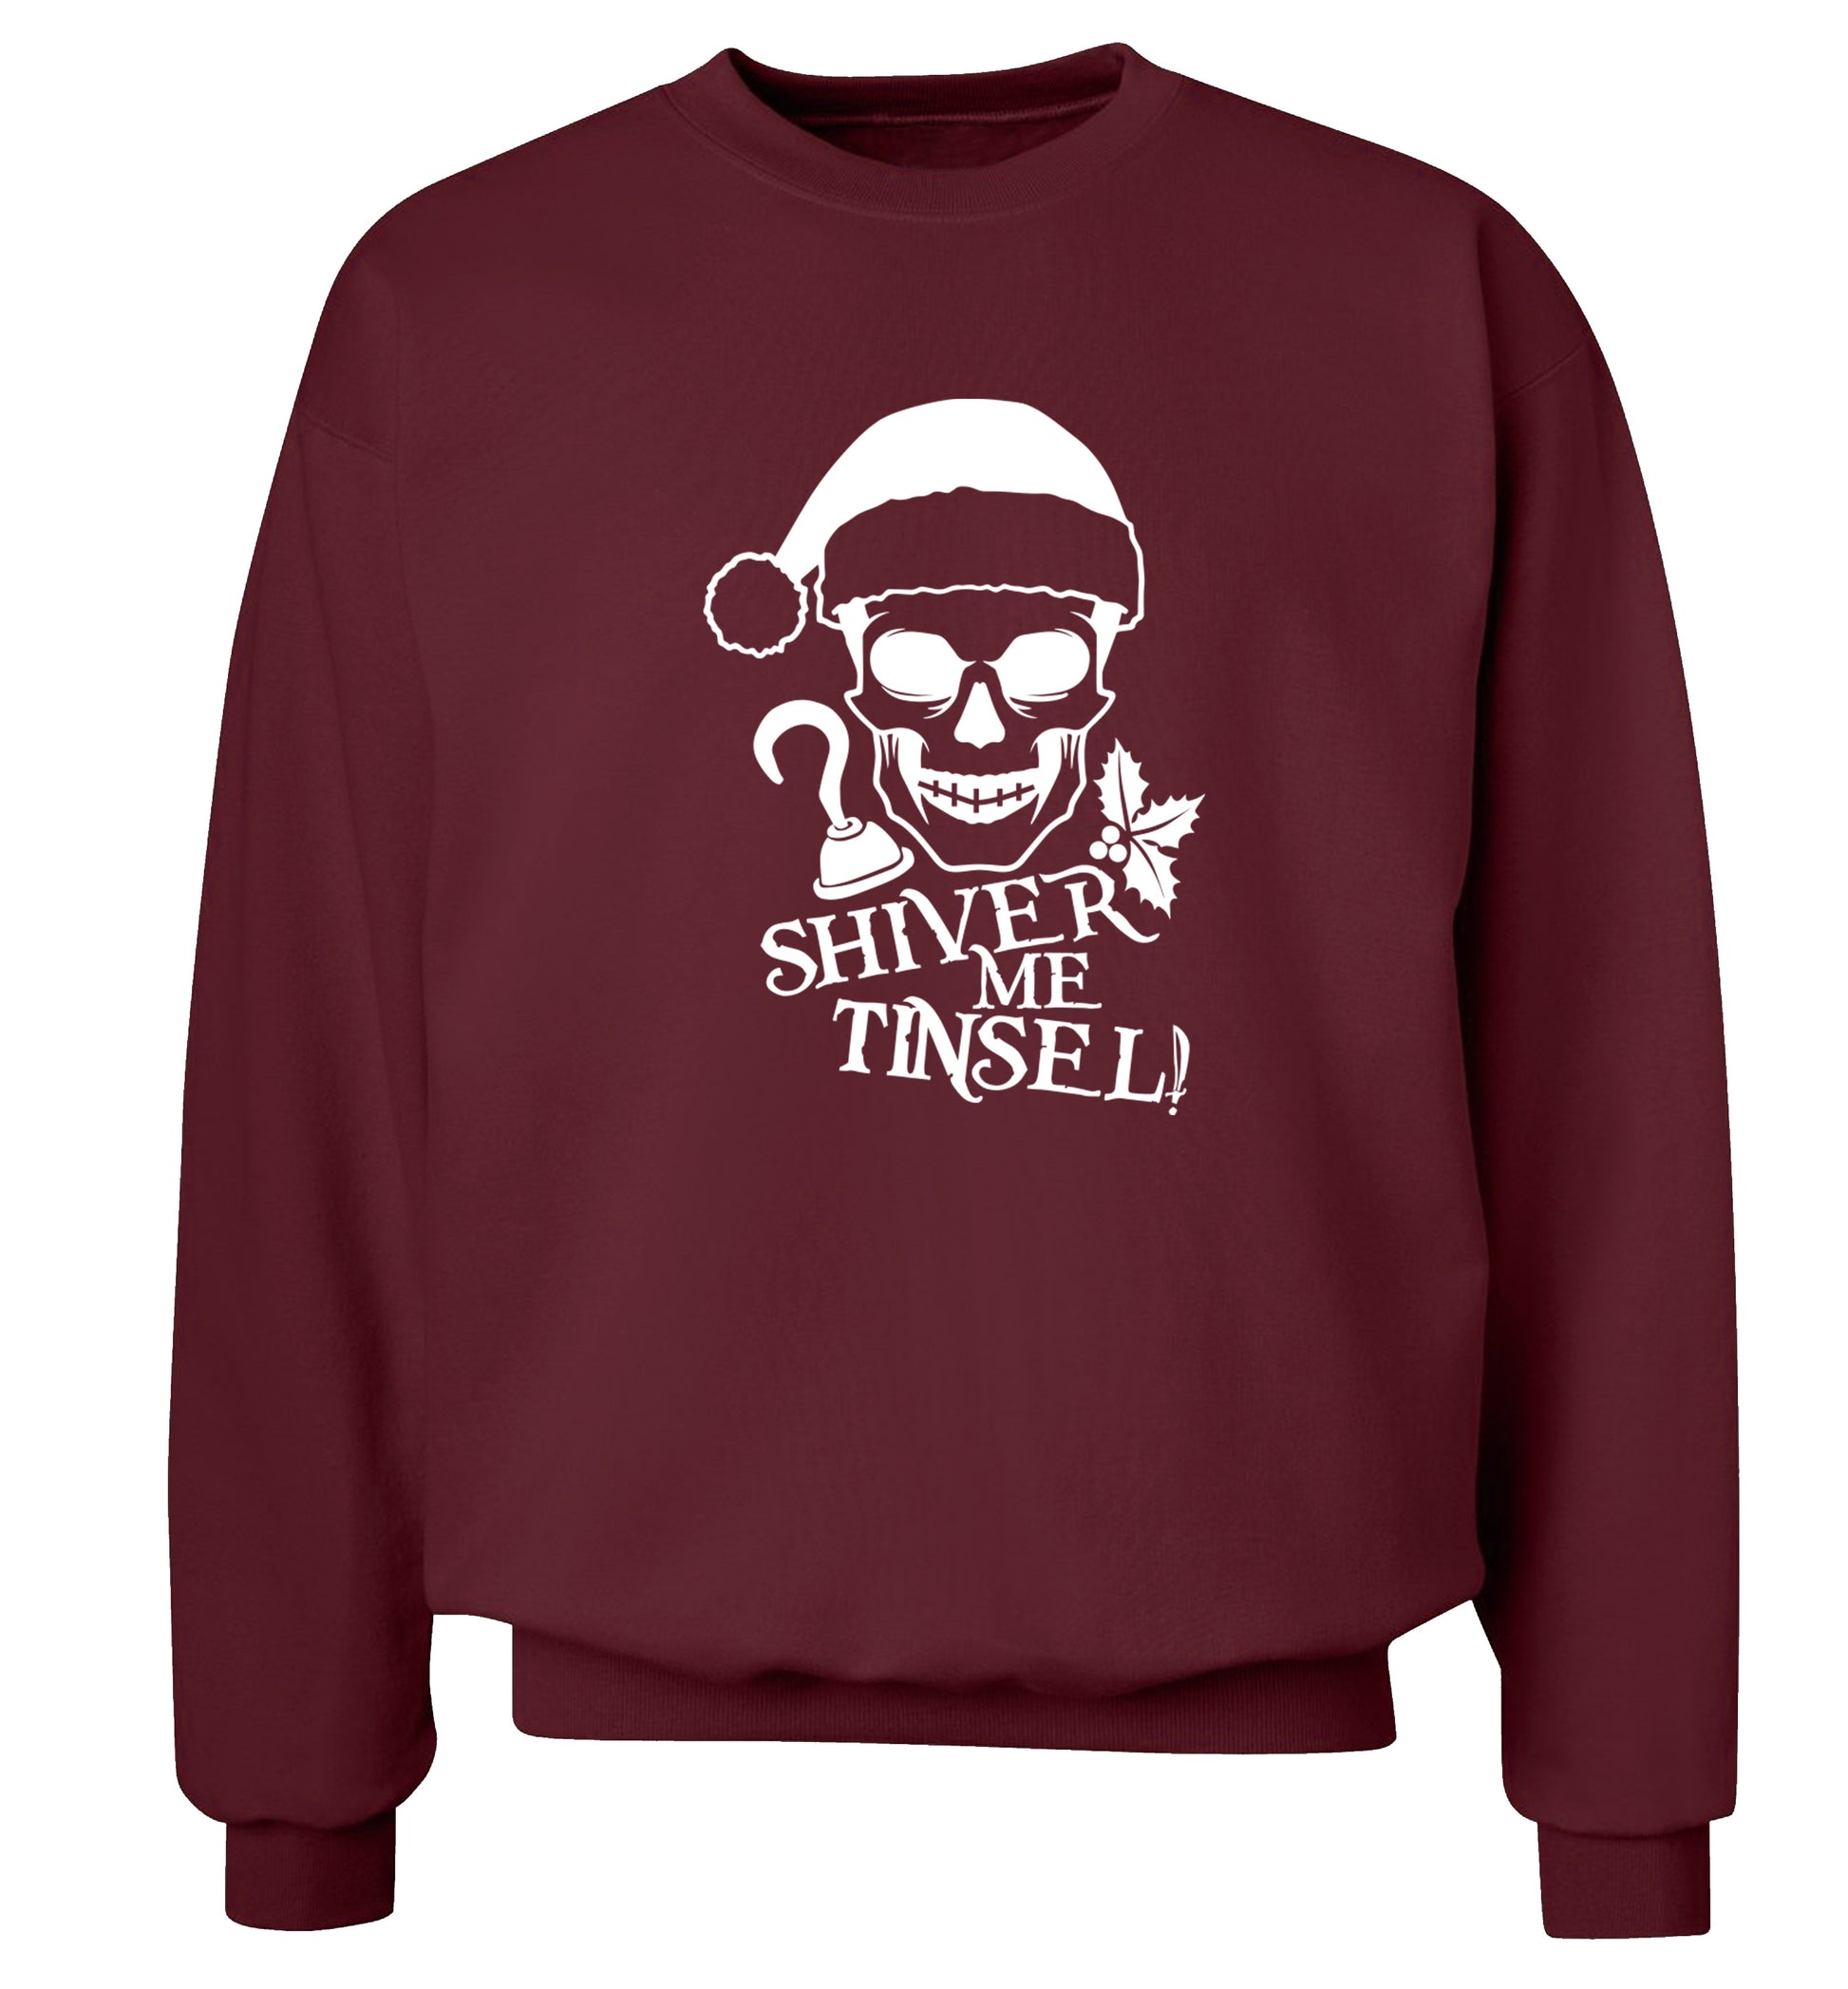 Shiver me tinsel Adult's unisex maroon Sweater 2XL